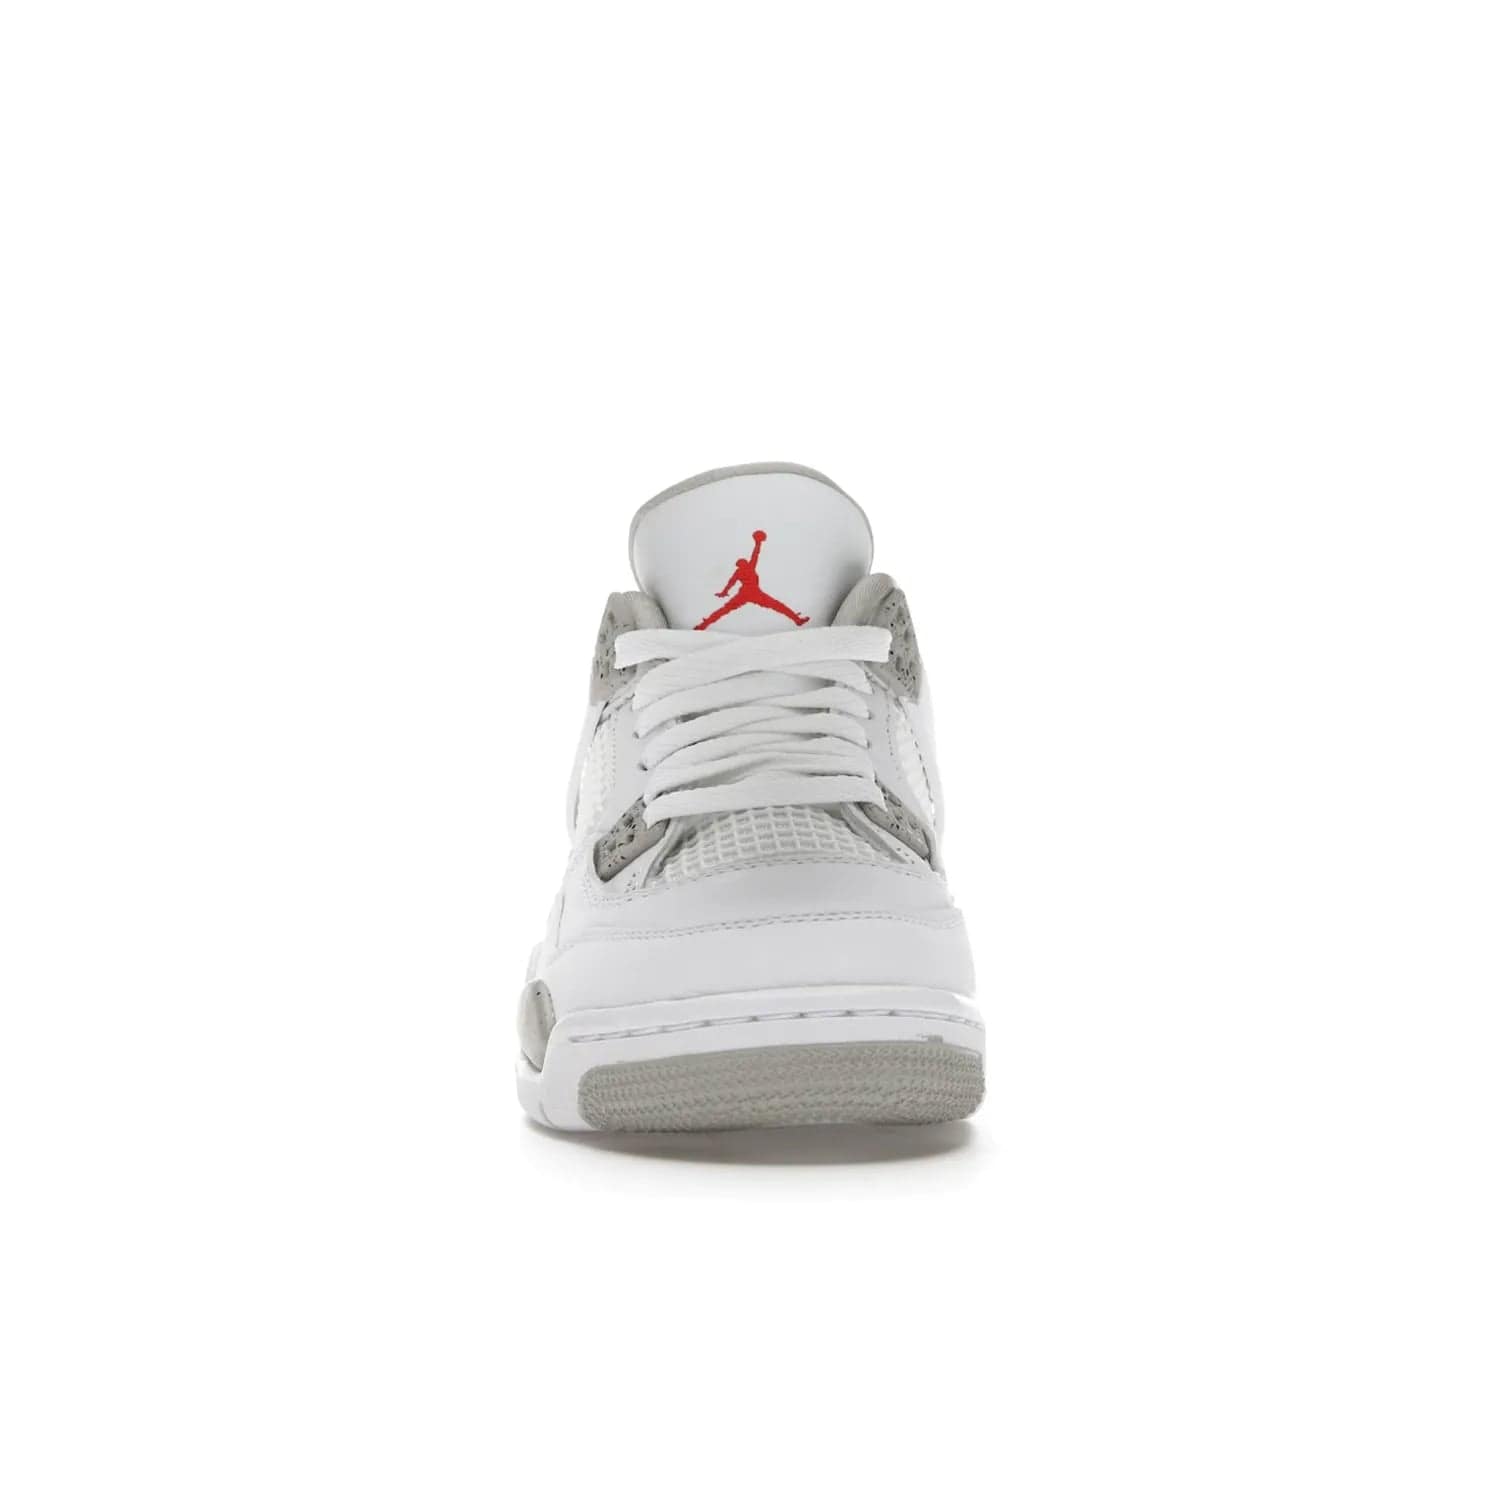 Jordan 4 Retro White Oreo (2021) (GS) - Image 10 - Only at www.BallersClubKickz.com - White Oreo Air Jordan 4 Retro 2021 GS - Iconic sneaker silhouette with white canvas upper, Tech Grey detailing, and Fire Red accents. Available July 2021.